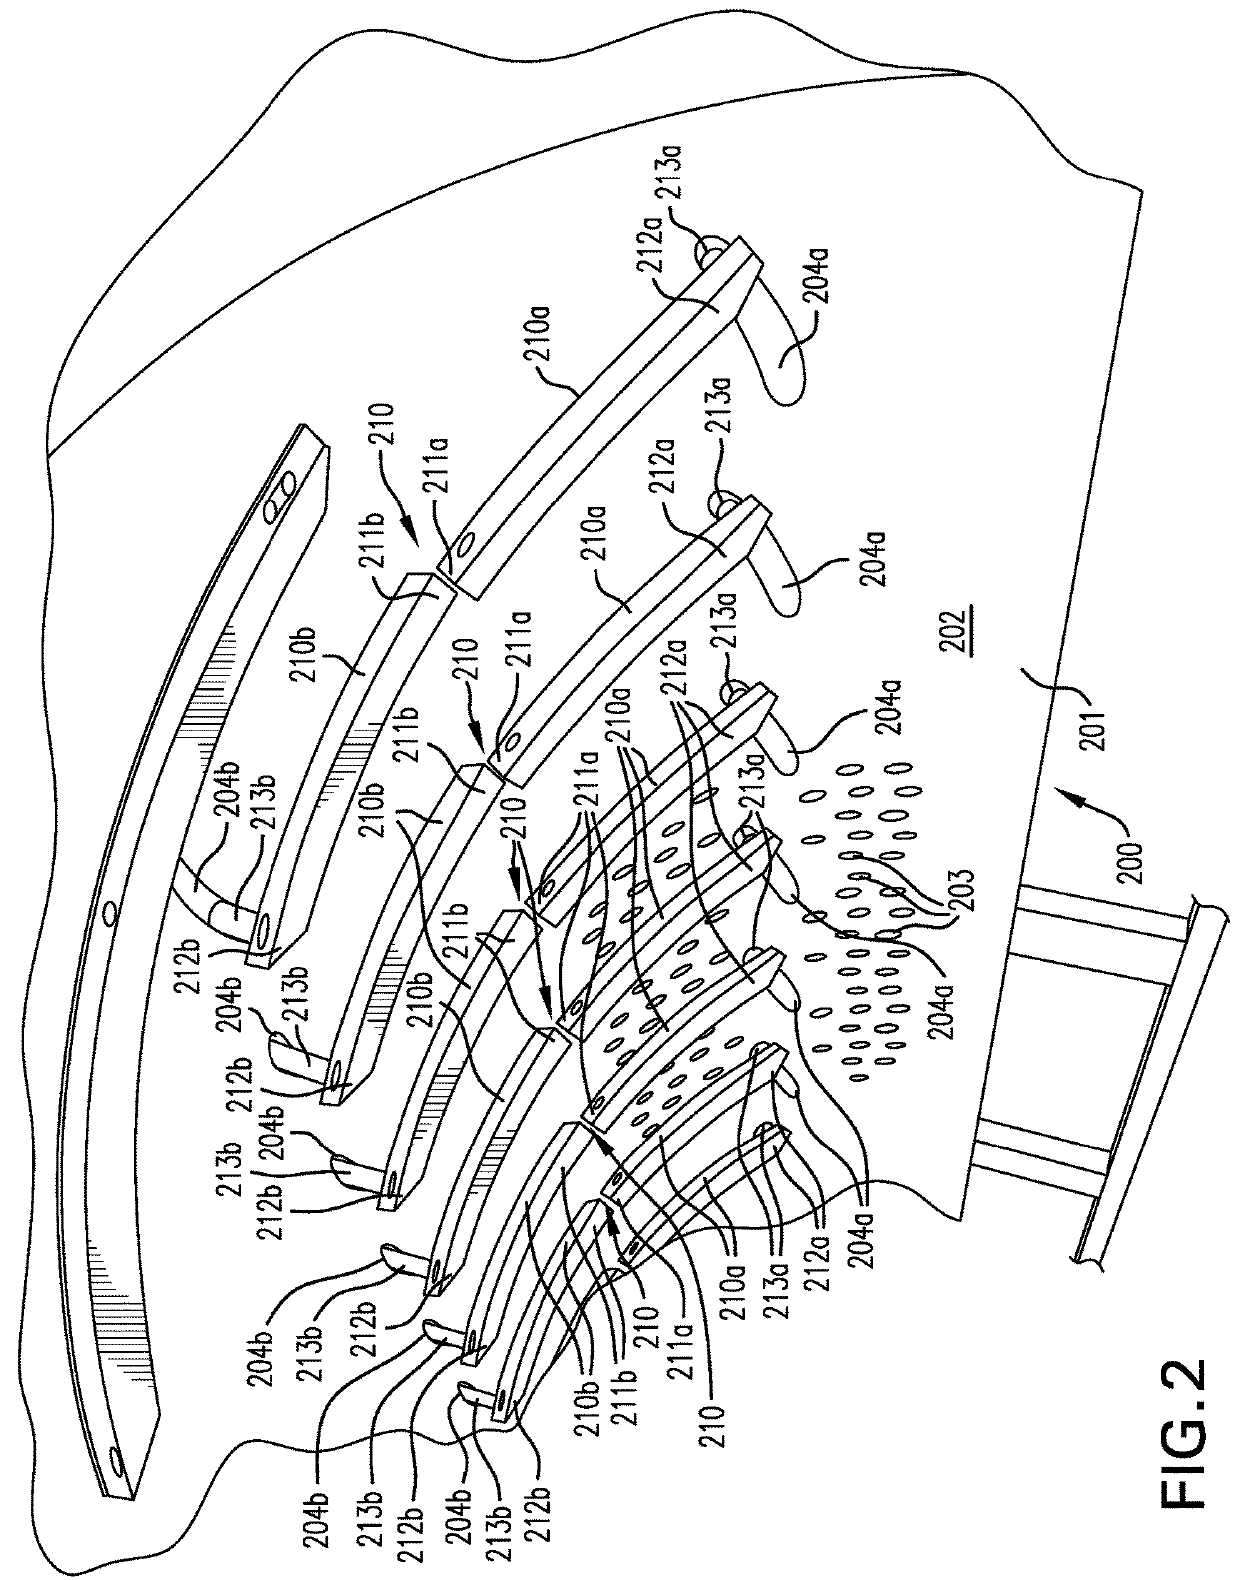 Threshing and separating system with adjustable rotor vanes